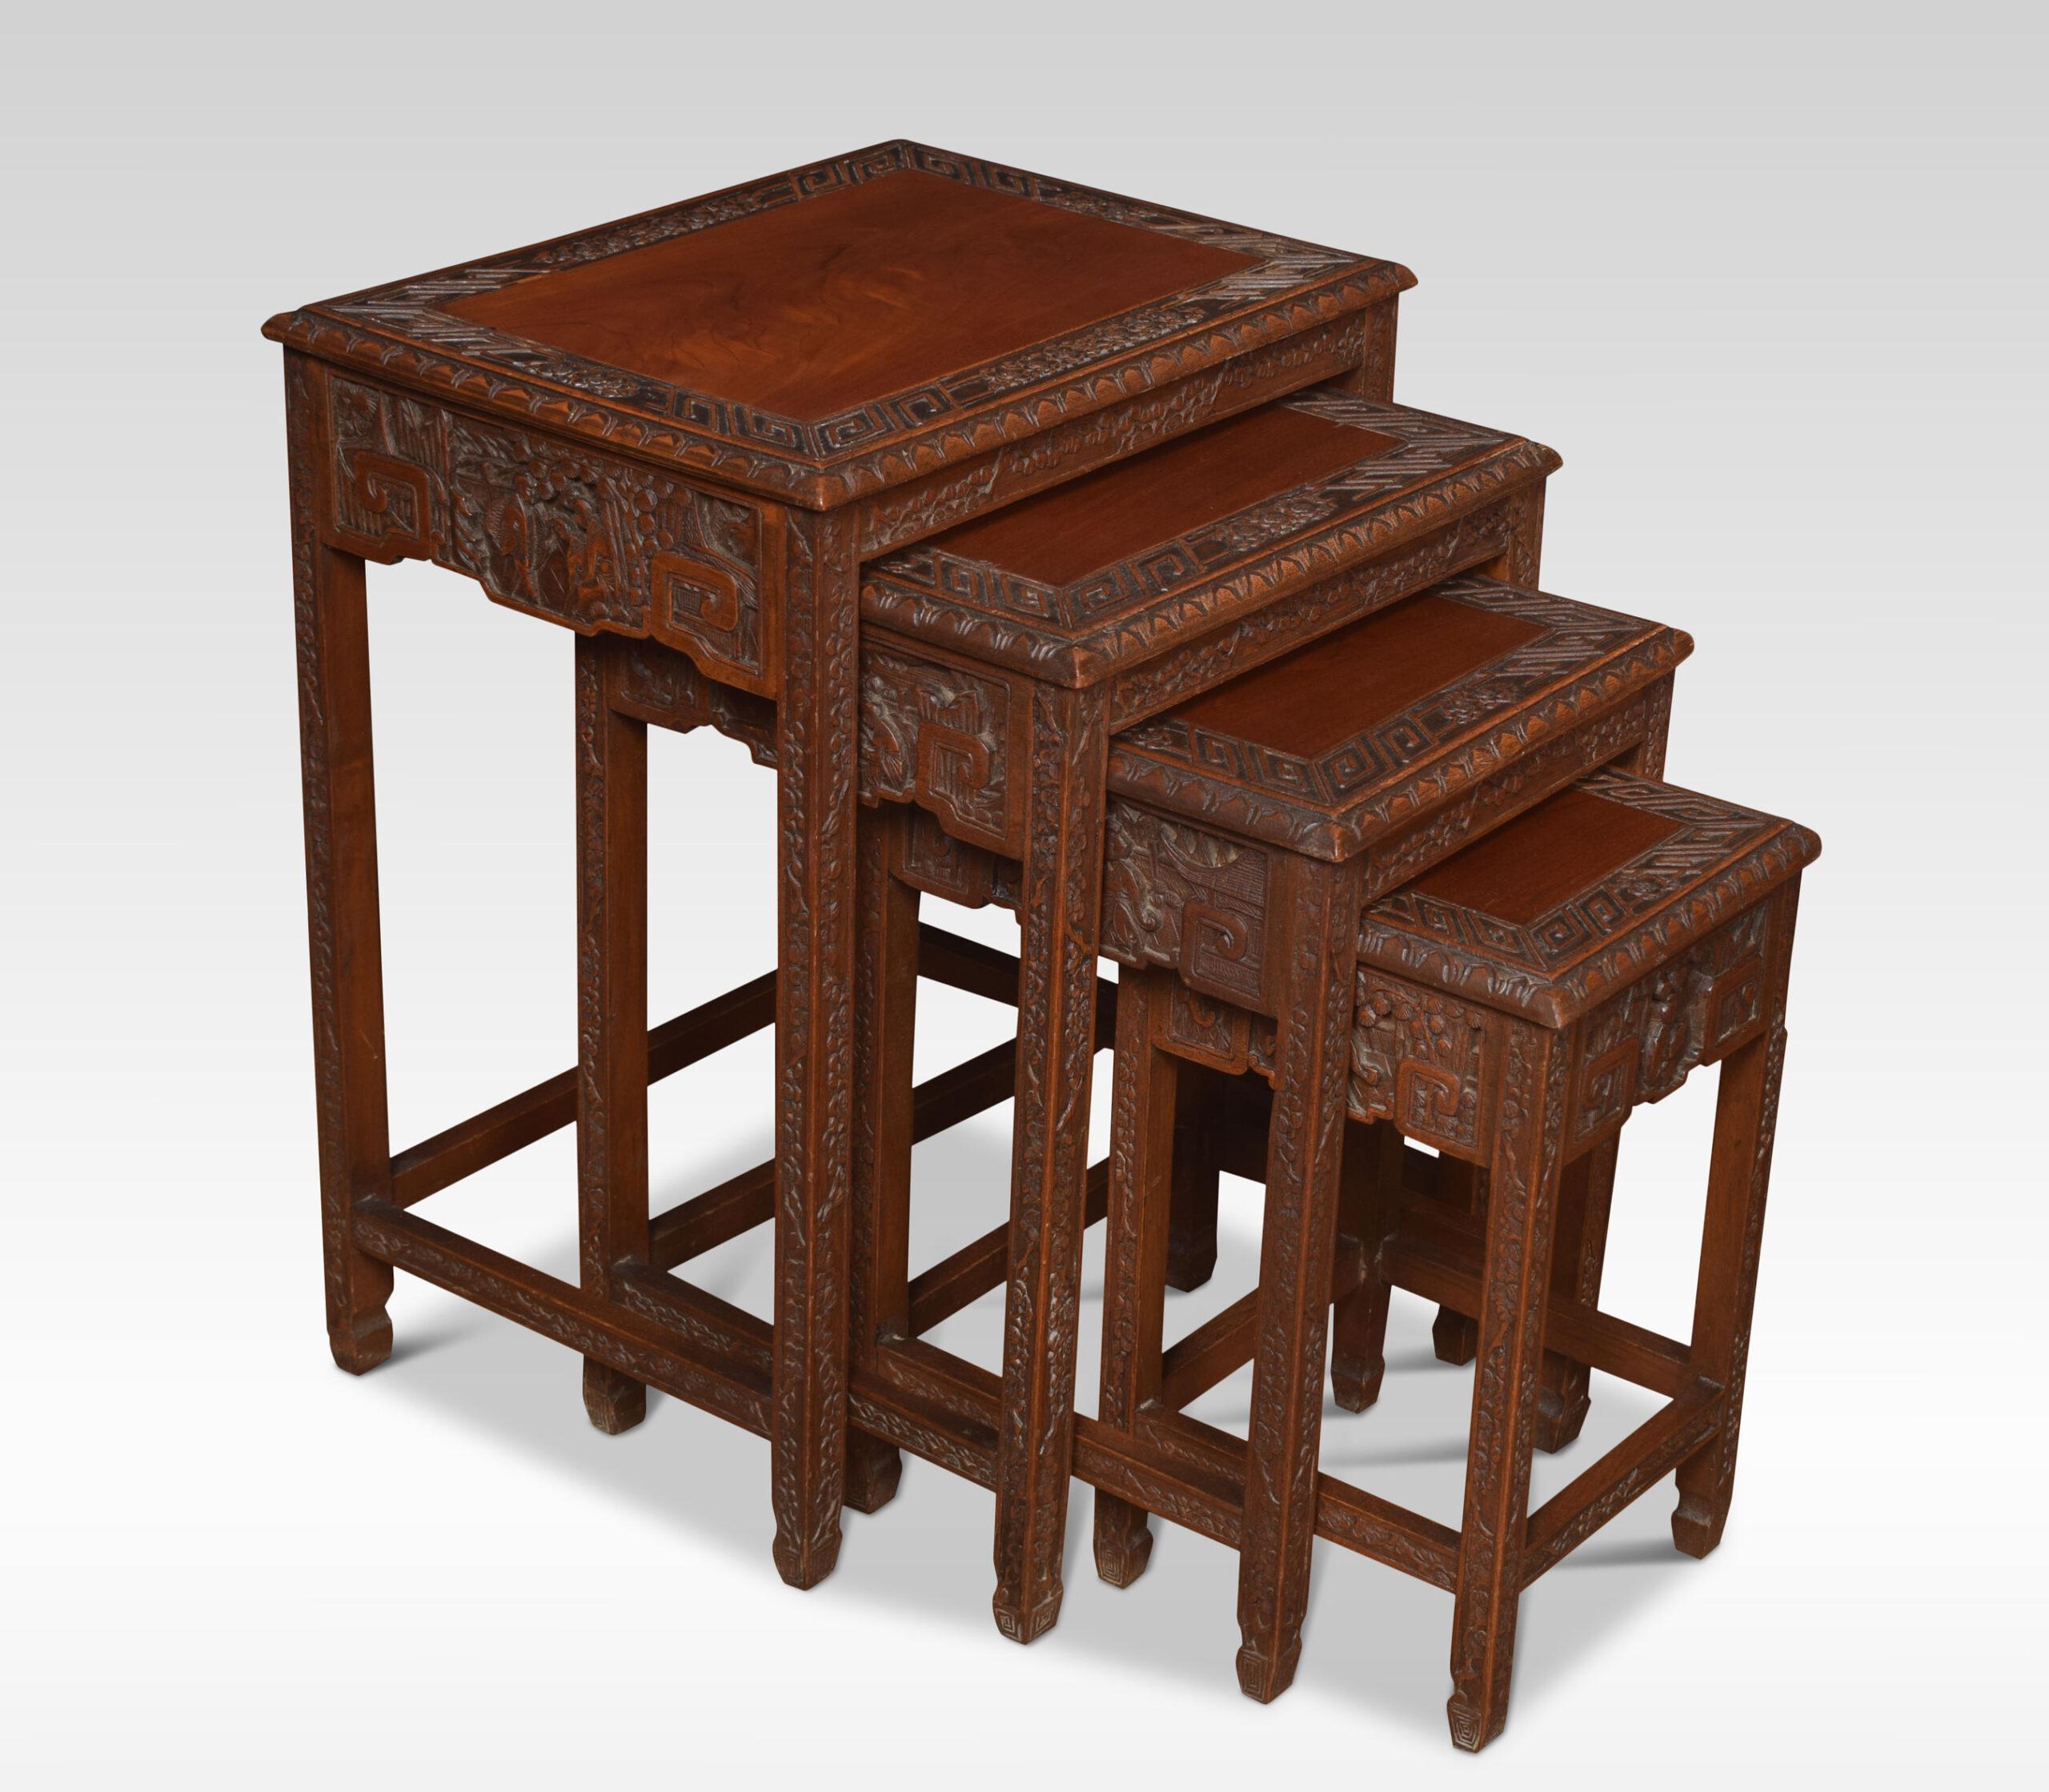 Nest of four Chinese rosewood tables each with a recessed rectangular paneled top and carved frieze on four slender supports with conforming stretchers
Dimensions
Height 25 Inches
Width 20.5 Inches
Depth 15 Inches